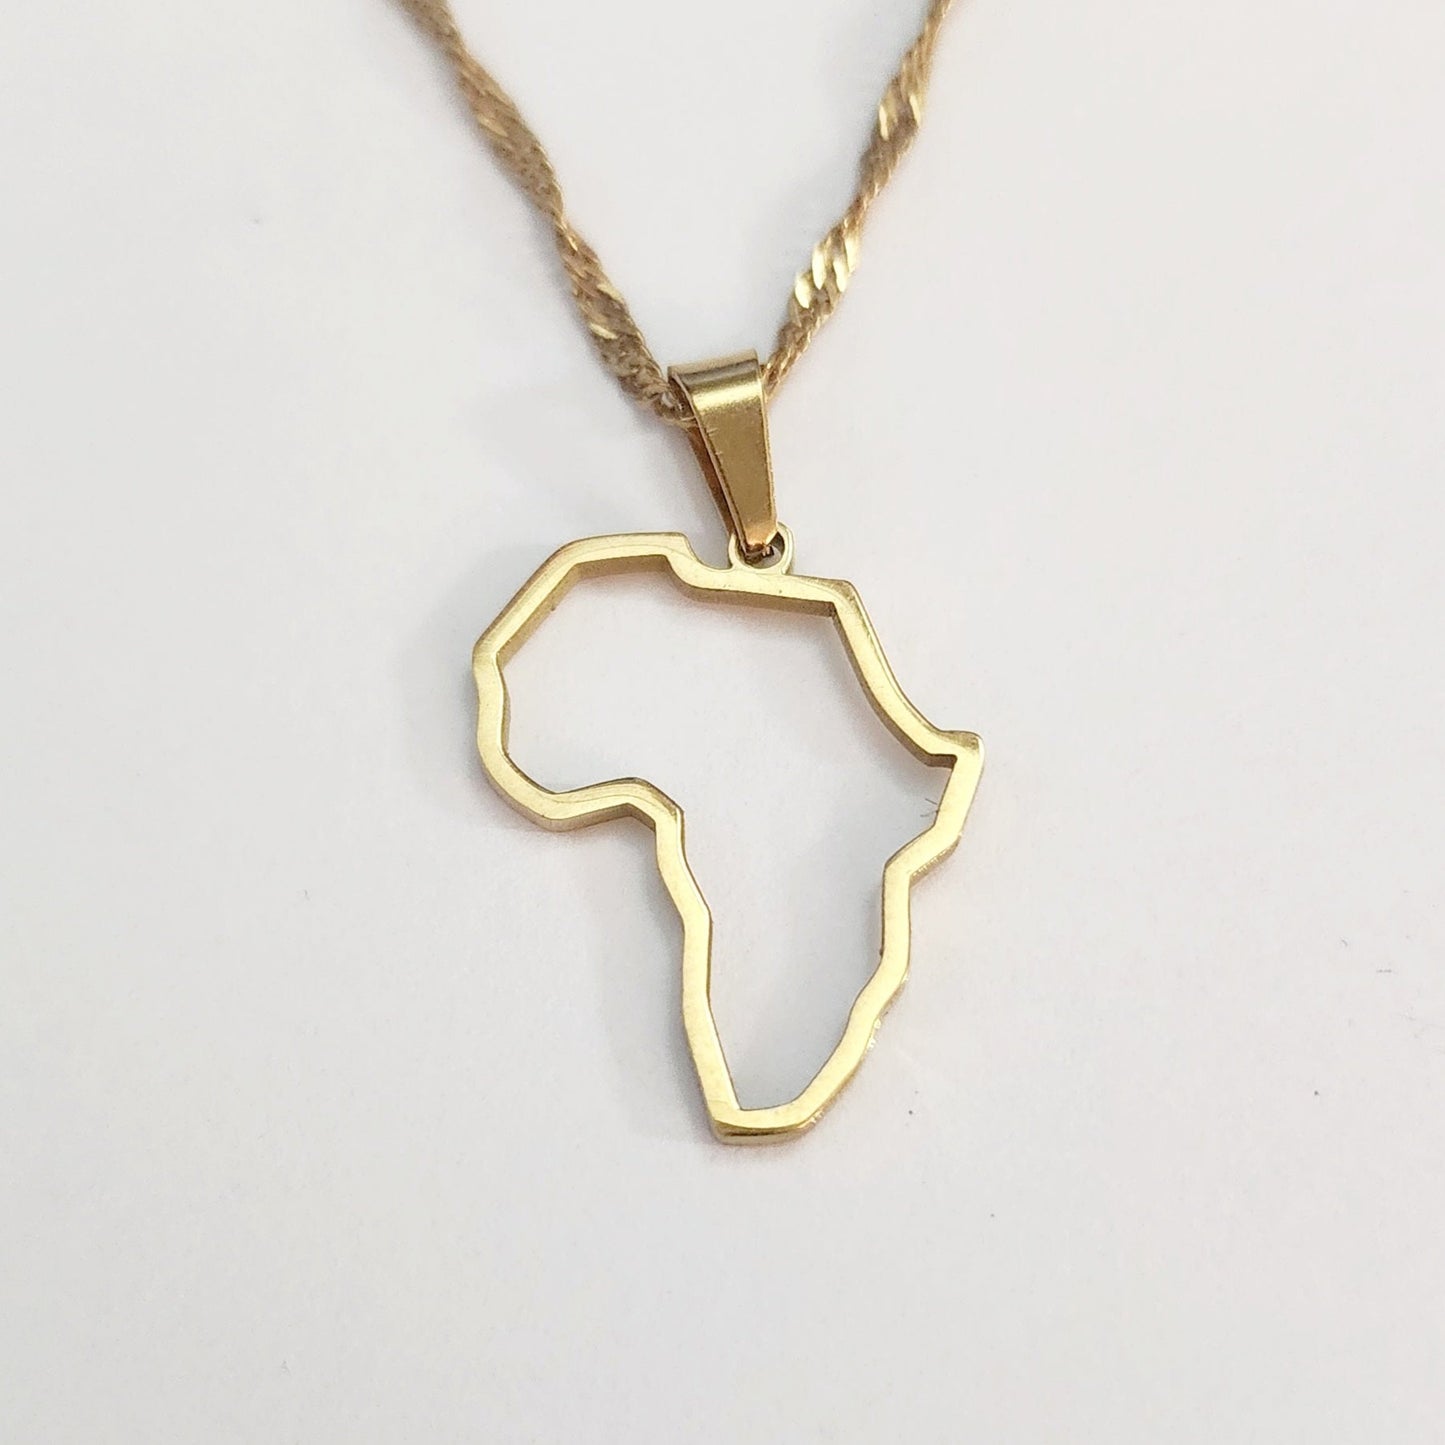 Small Africa outline Pendant